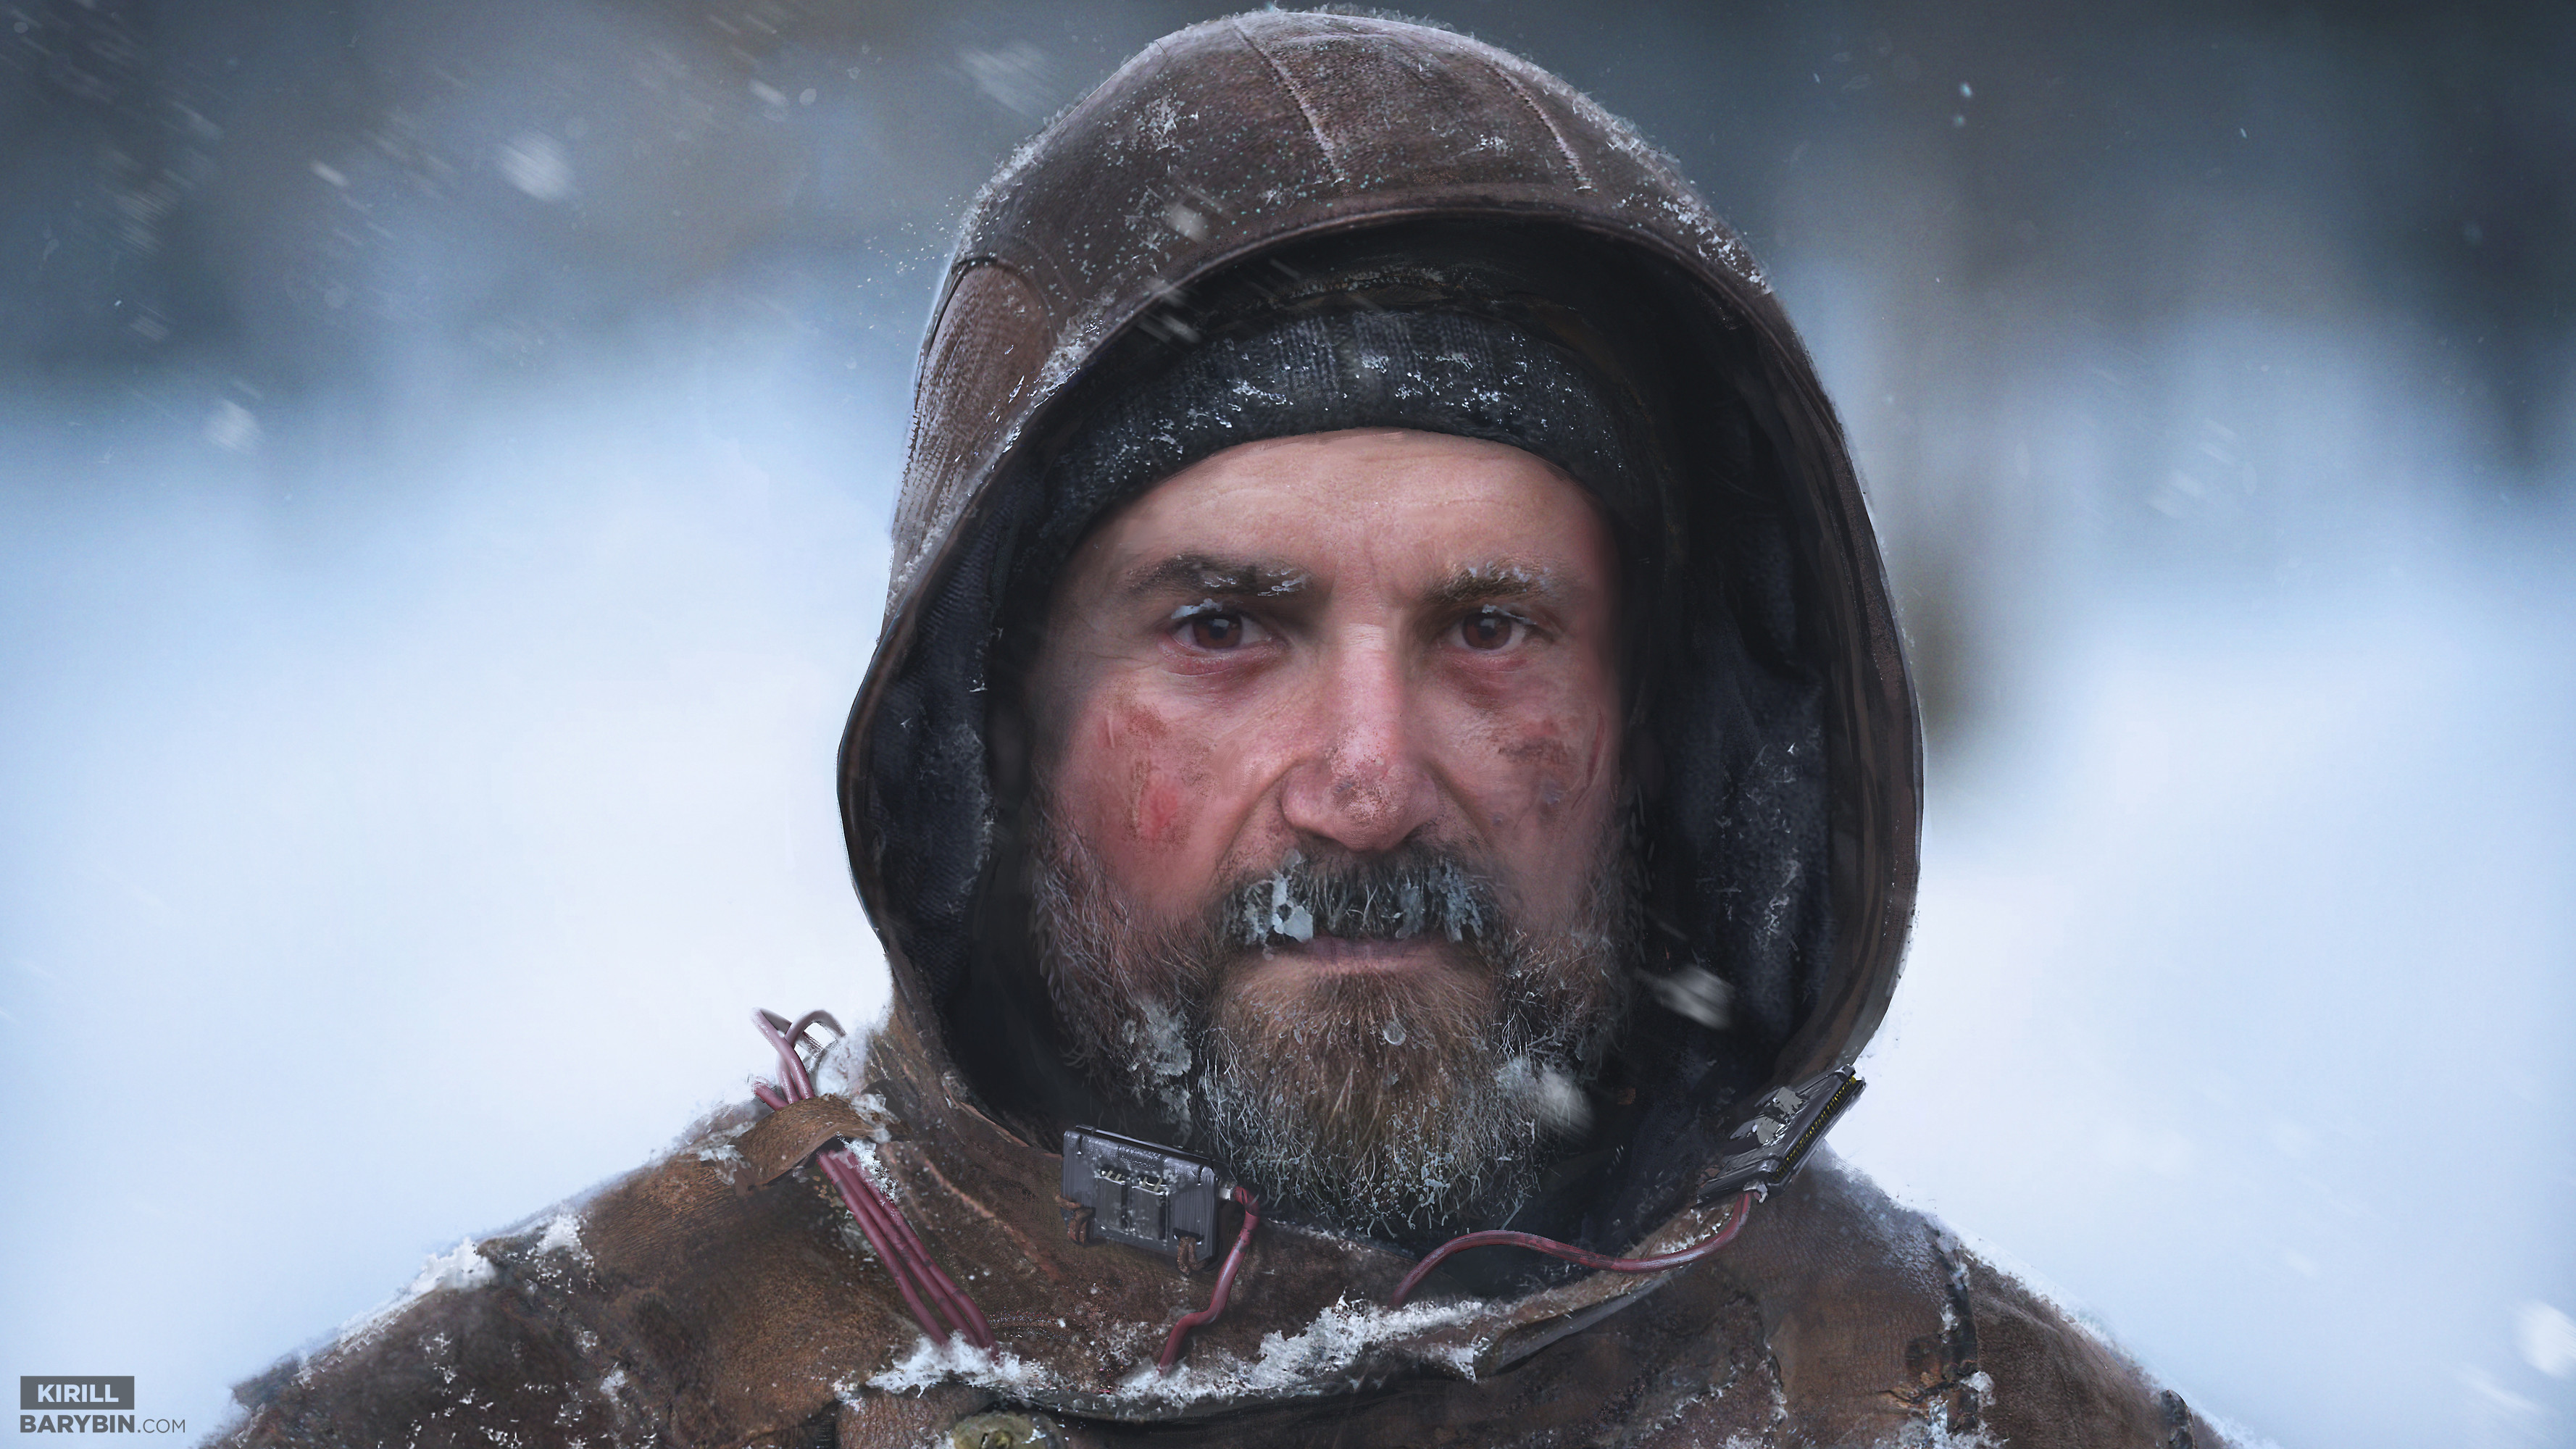 Siberia, Russia. Year 2082. 
Semyon Bashkin is one of the last remaining trappers, trying to hunt and survive in the vast Sibirian Taiga.